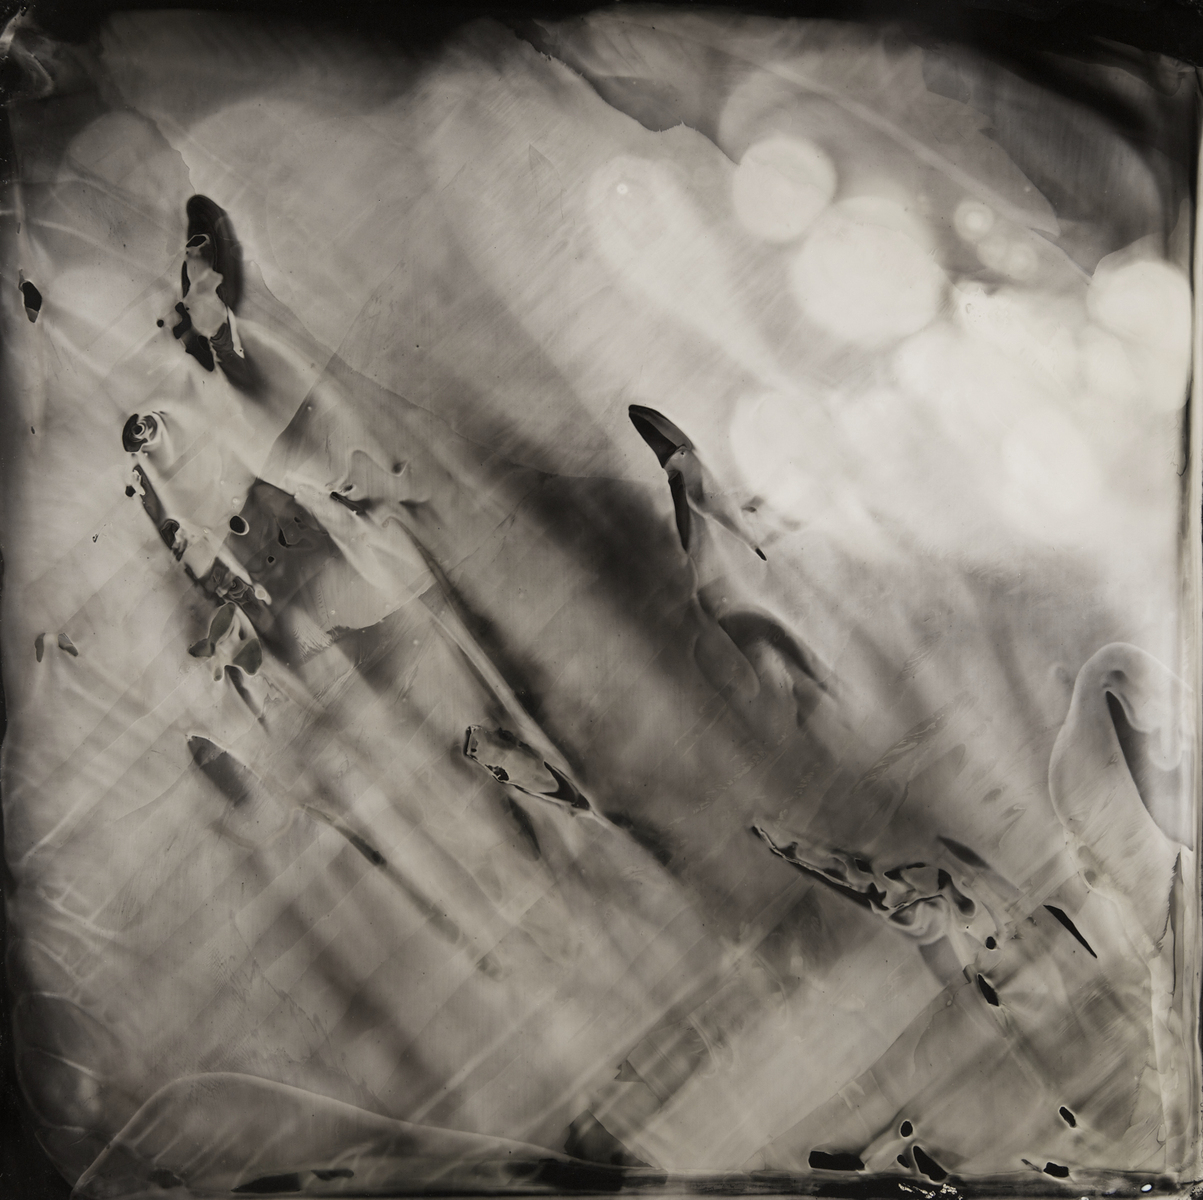 11:52 PM, April 4, 2015. Collodion tintype, 14x14 inches.